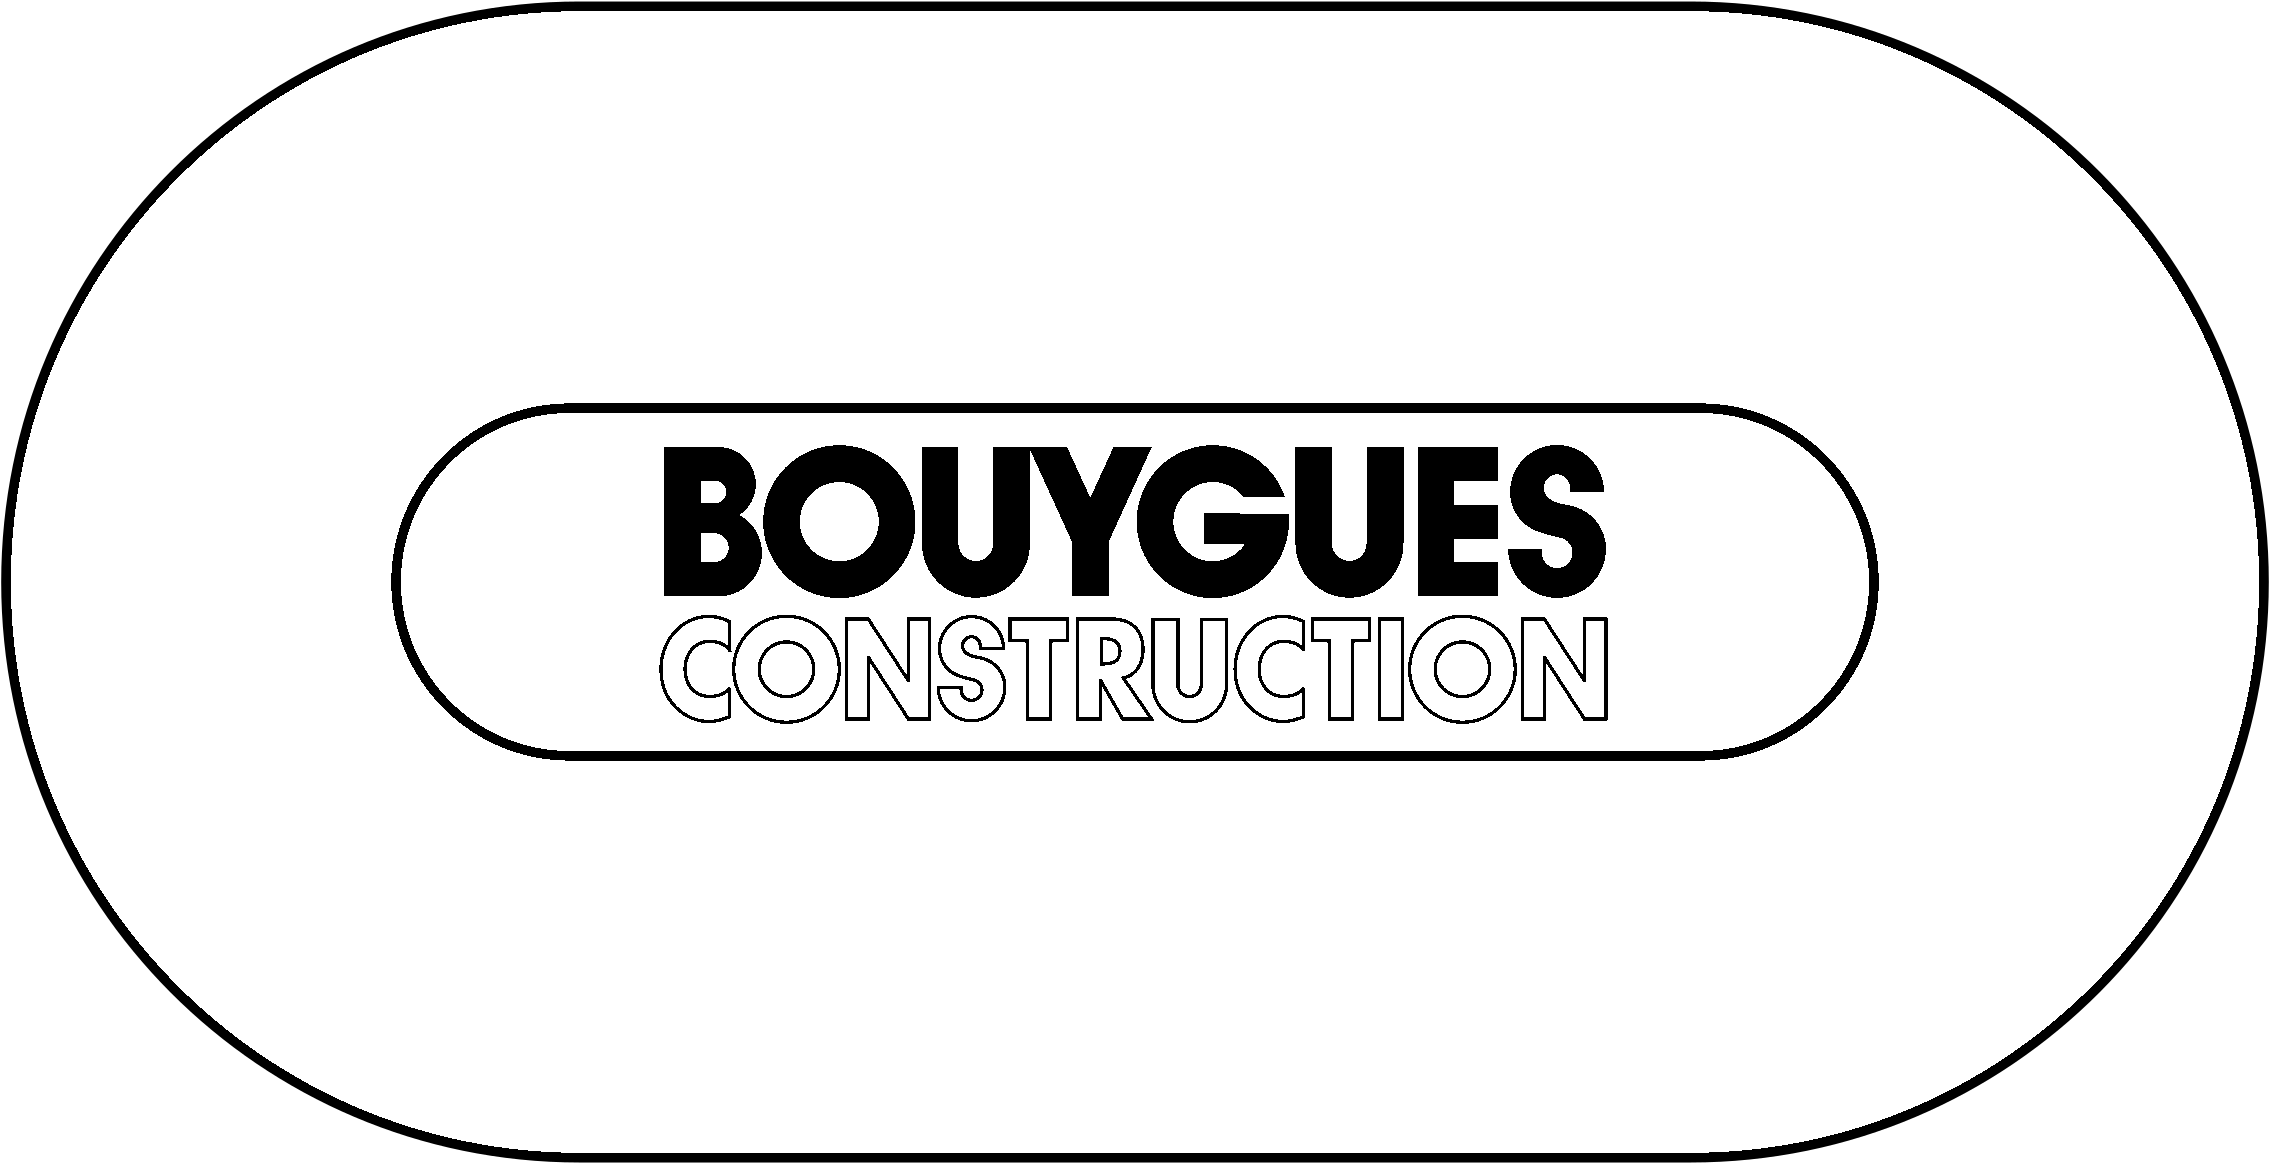 Bouygues Construction Logo Blackand White